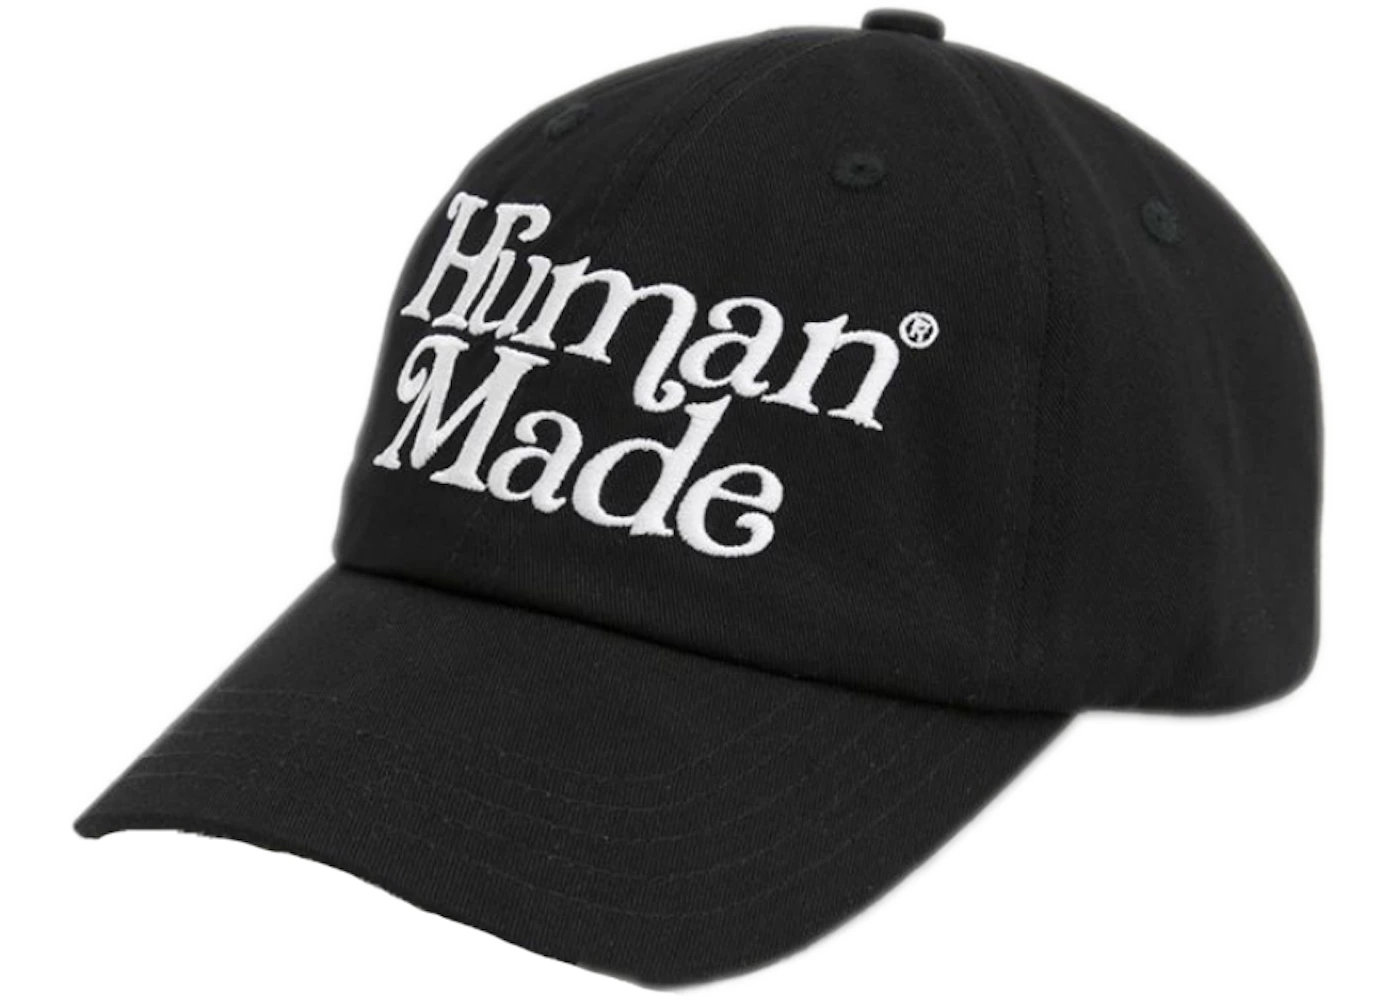 HUMAN MADE®︎ x Girls Don't Cry キャップ | myglobaltax.com